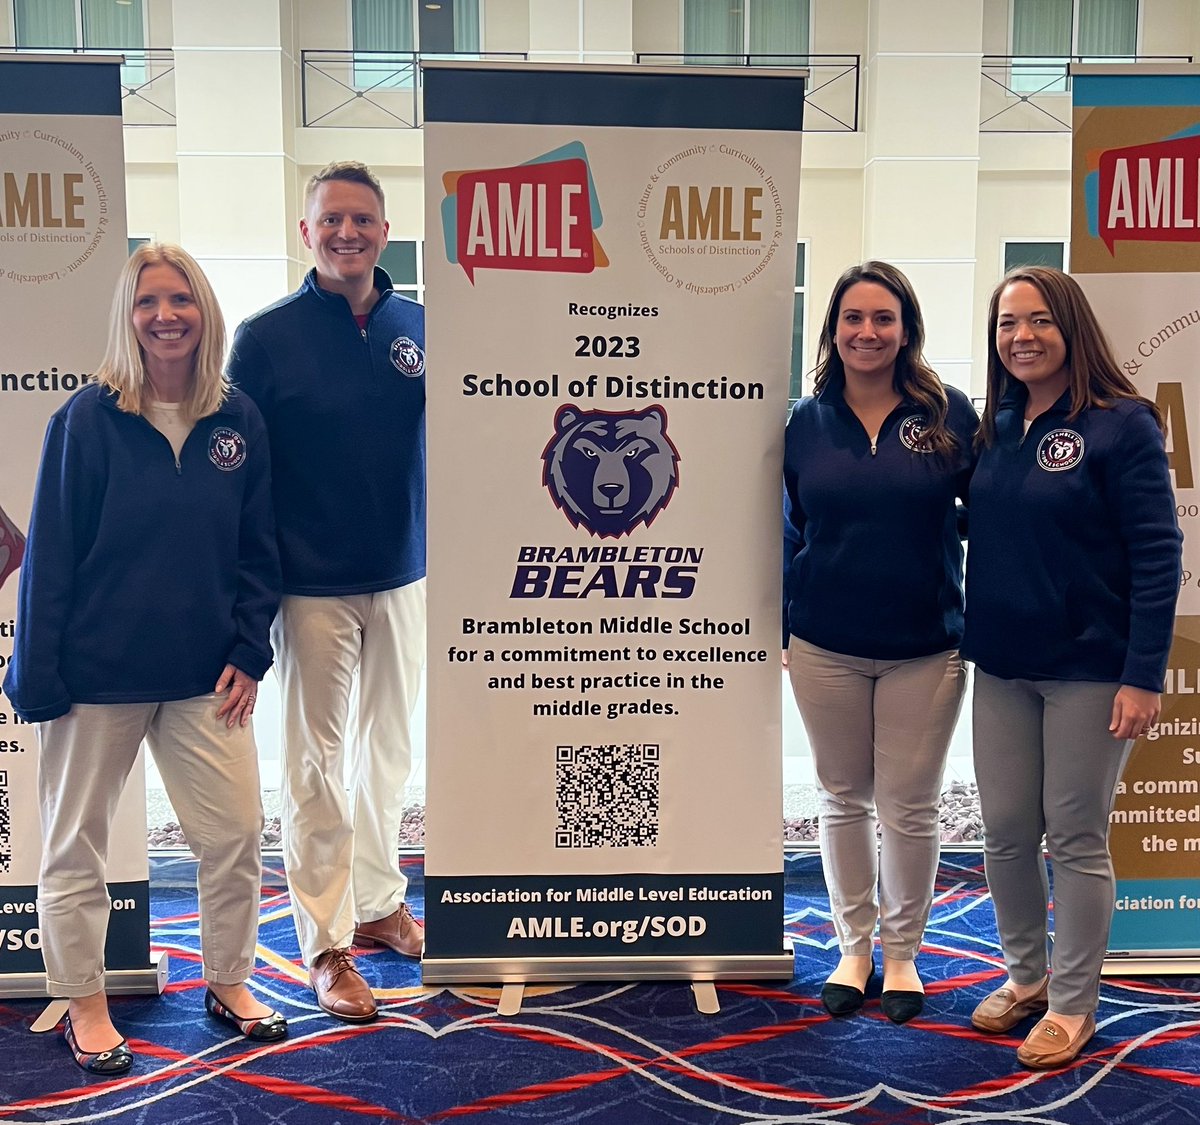 It was a true honor to present at #AMLE50 with this talented group of @BAM_MS_Official leaders sharing our MTSS work for each and every student with middle school colleagues from across the country. There were even attendees from as far as Hawaii—amazing! Proud principal moment!